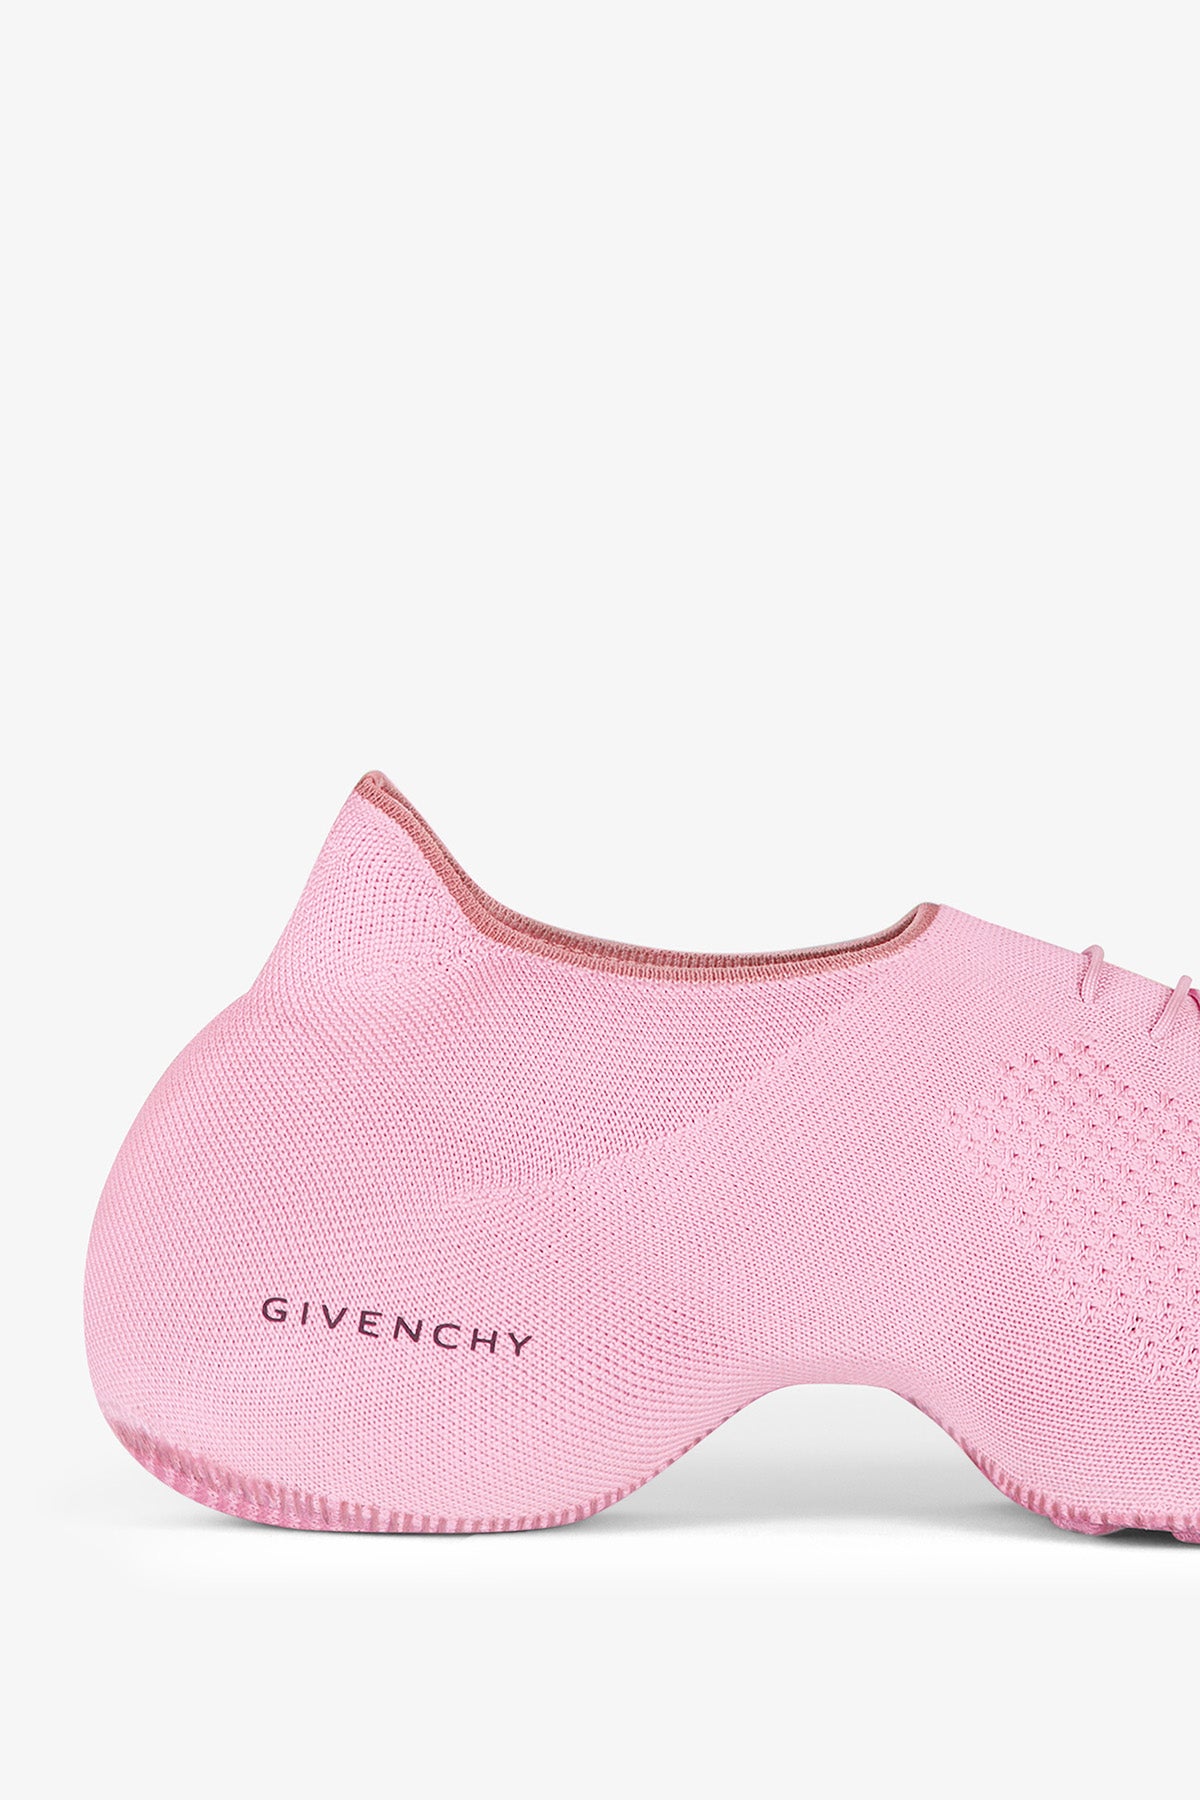 GIVENCHY | TK-360 SNEAKERS